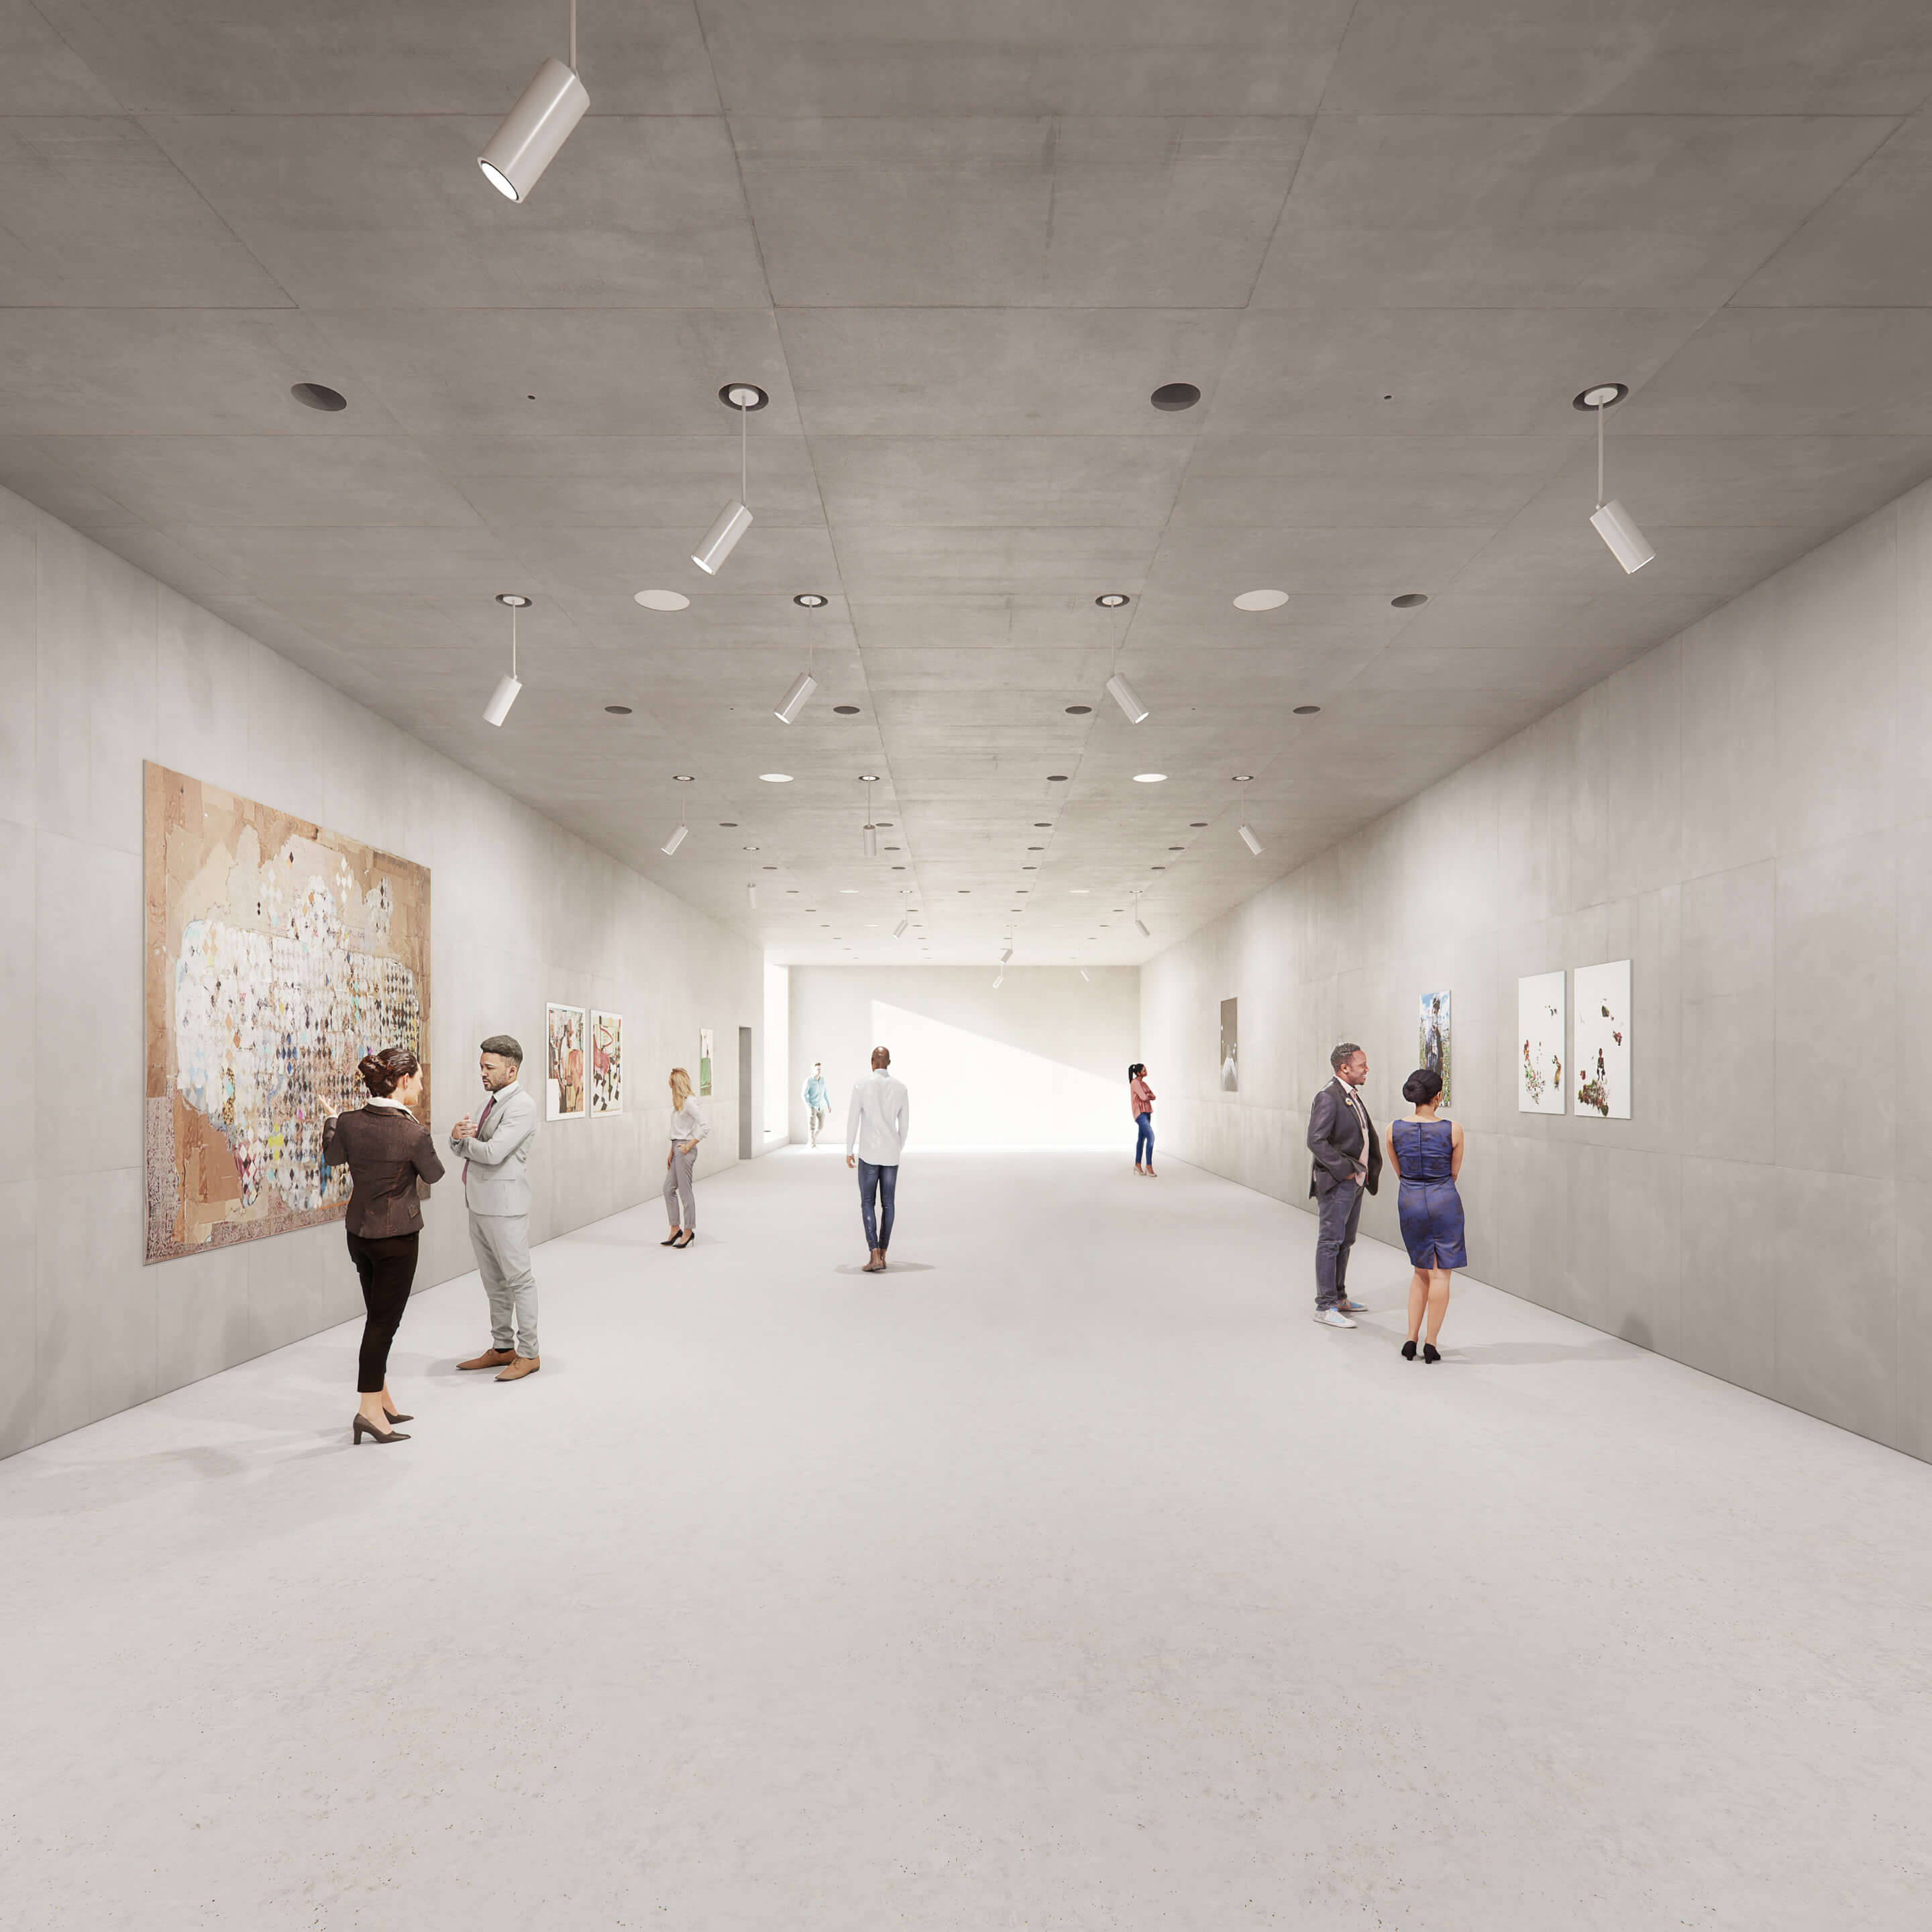 rendering of people viewing art in an exhibition space